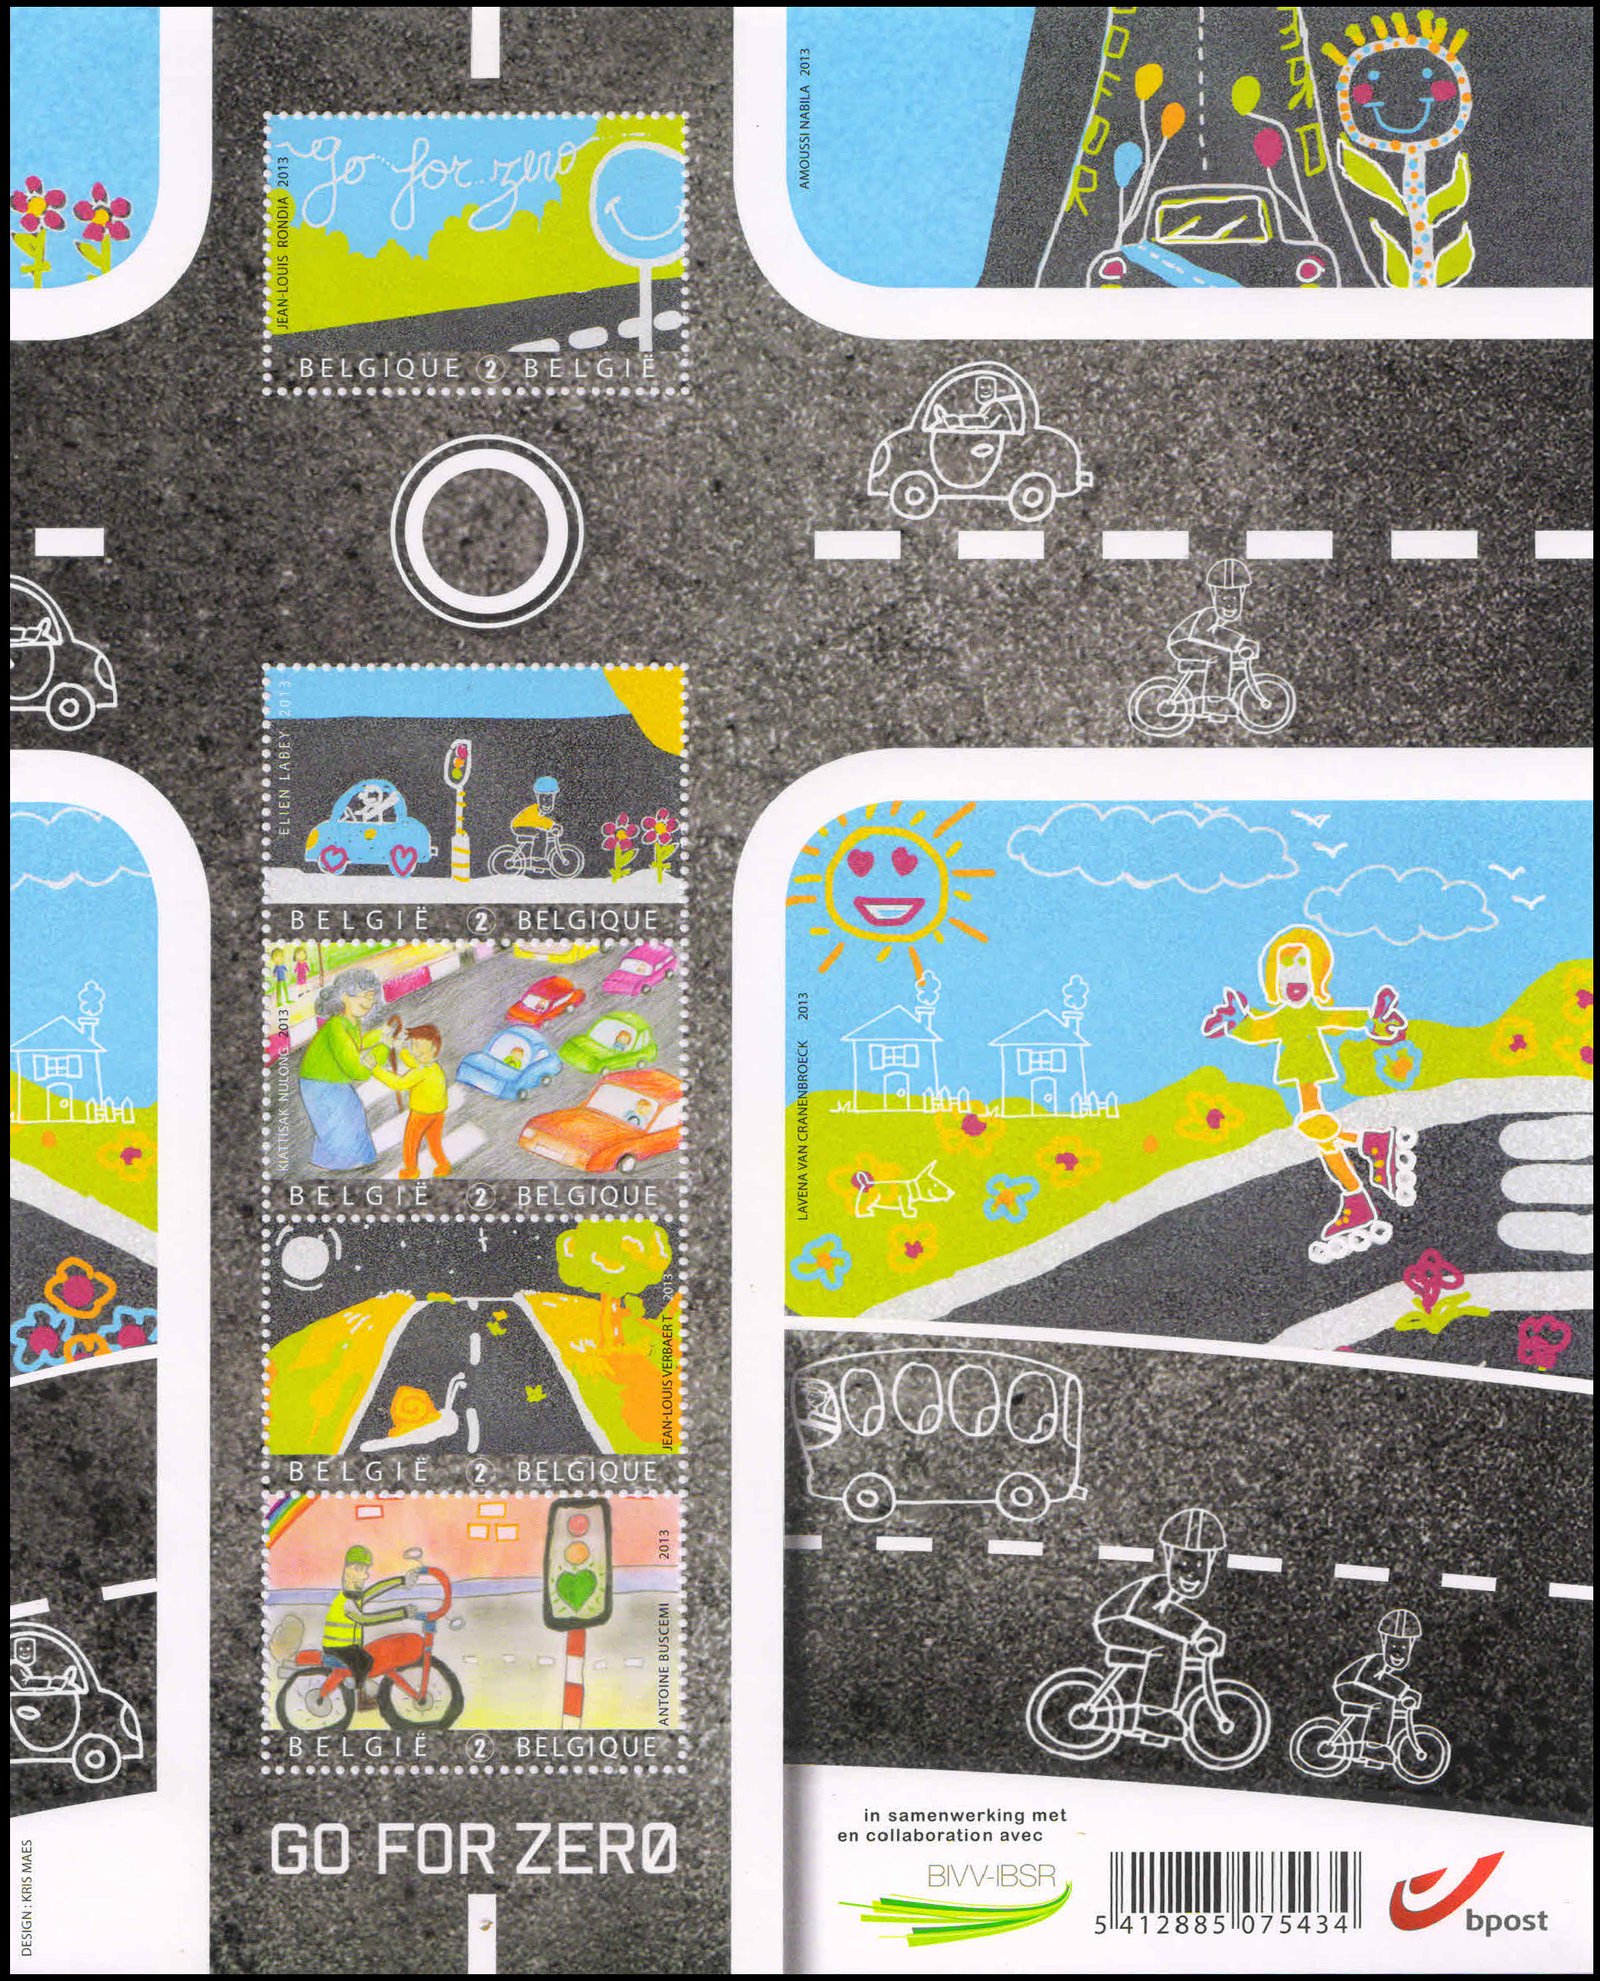 BELGIUM 2013-Road Safety, Belgium Institute for Road Safety Go for Zero Campaign, Children Drawing, Miniature of 5 Stamps, MNH, S.G. MS 4497-Cat £ 42-